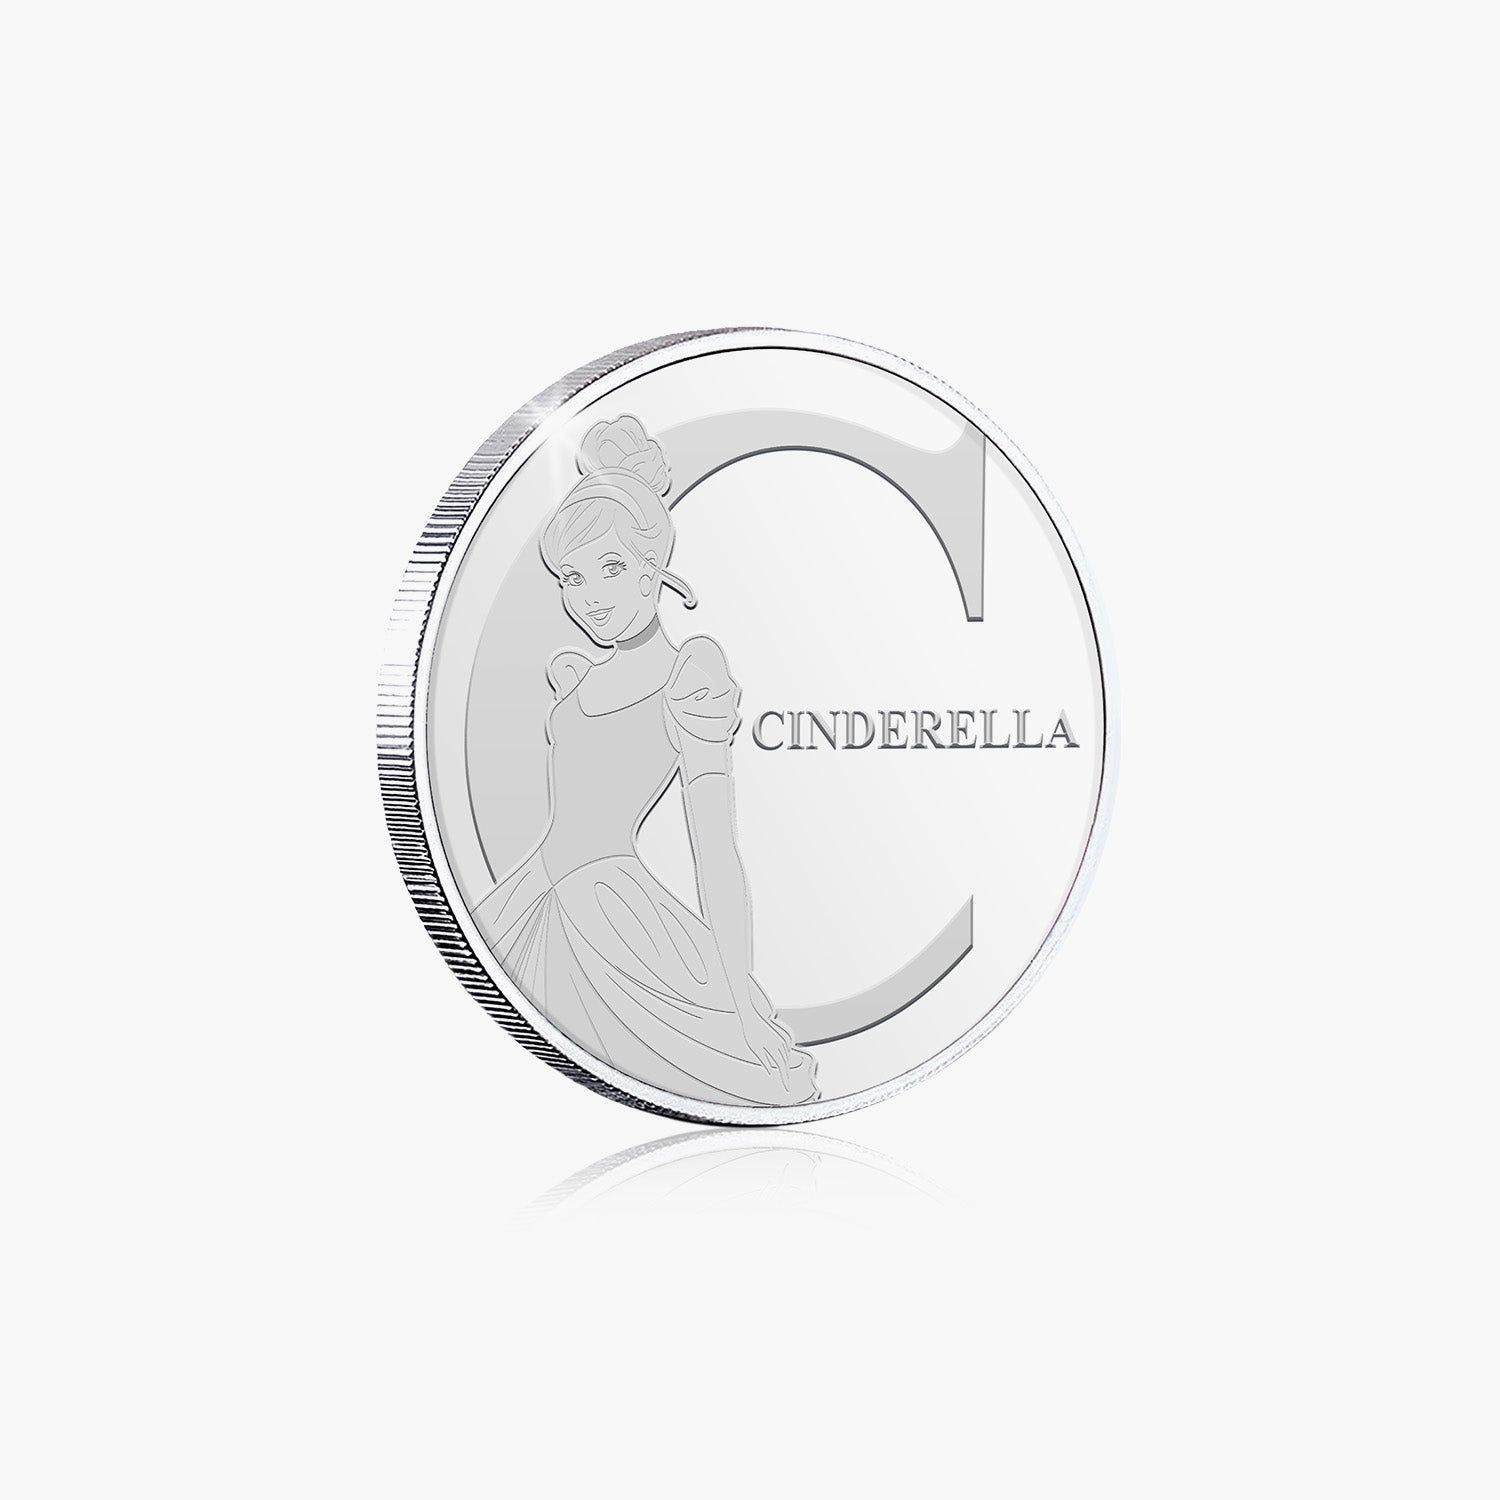 C is for Cinderella Silver-Plated Commemorative